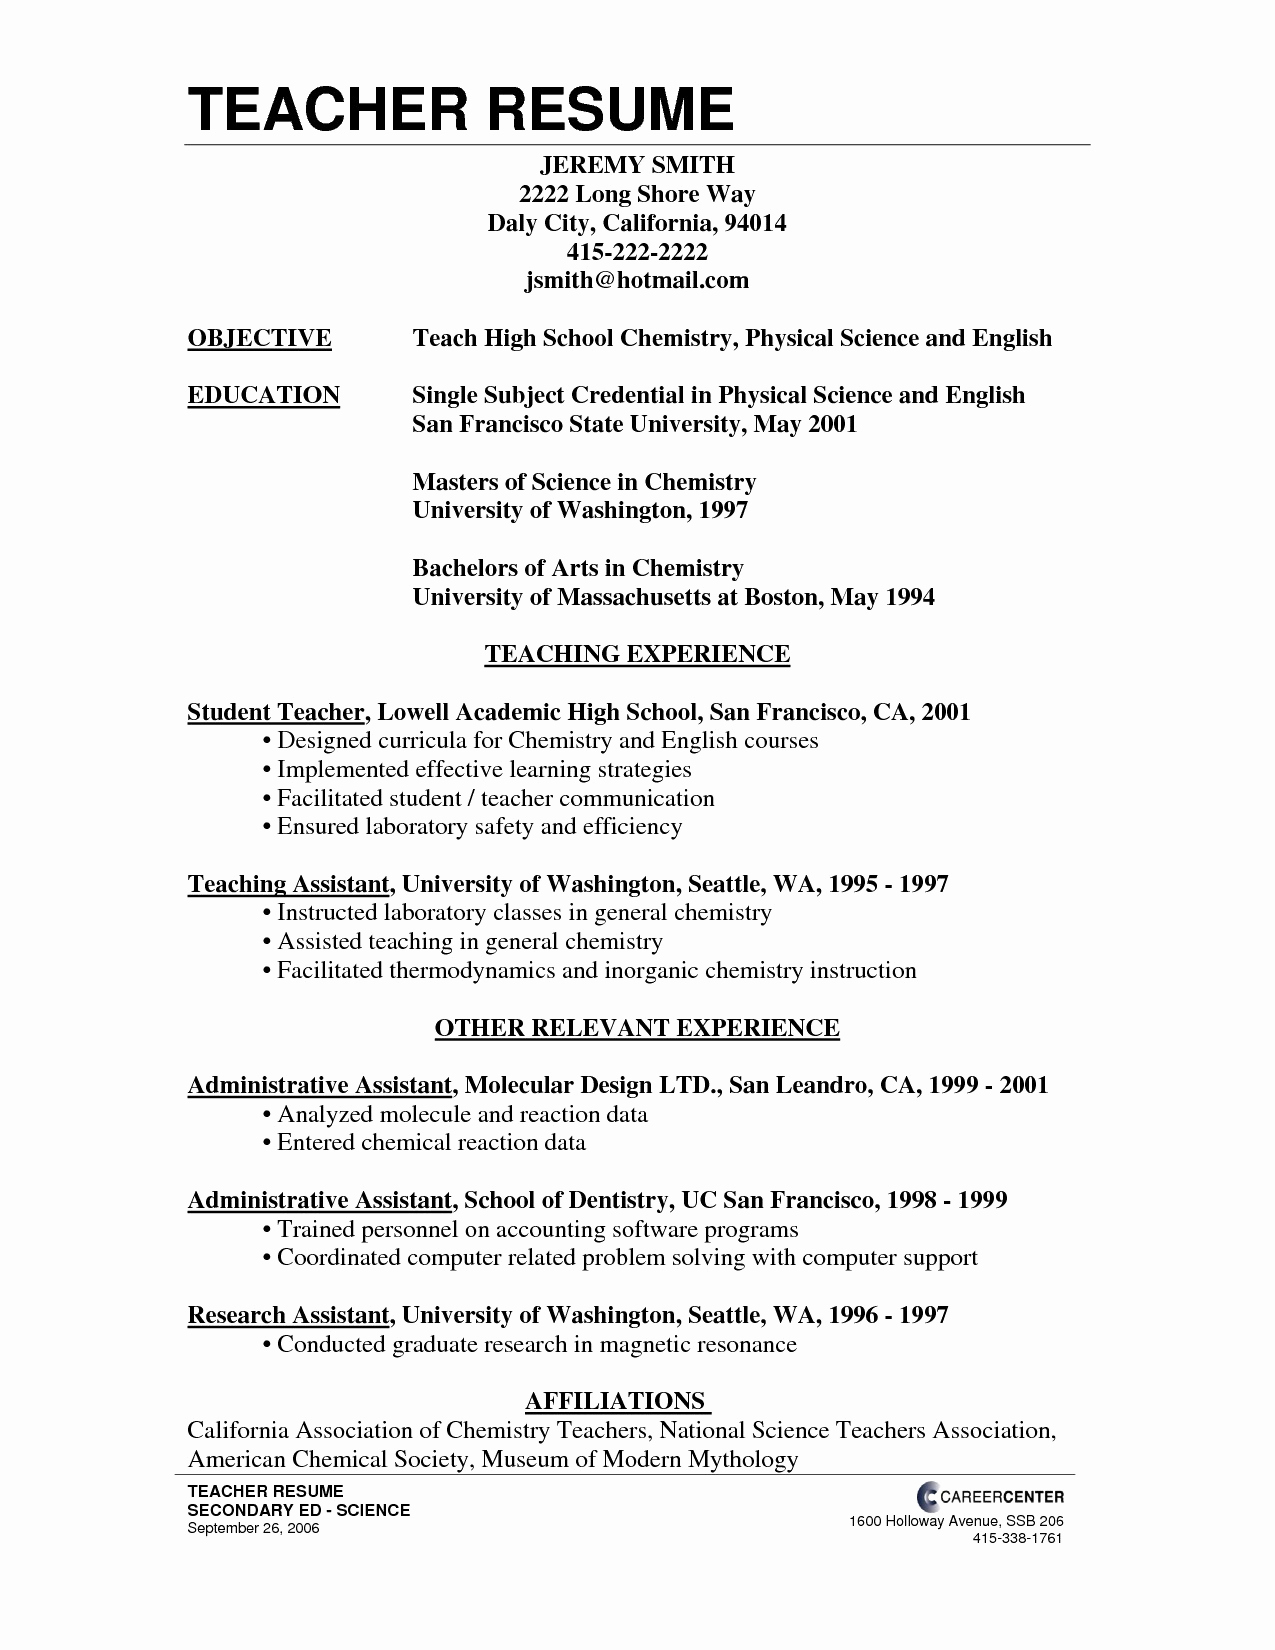 Amazing Cover Letter Template - Resume Cover Letter Example New Free Cover Letter Templates Examples